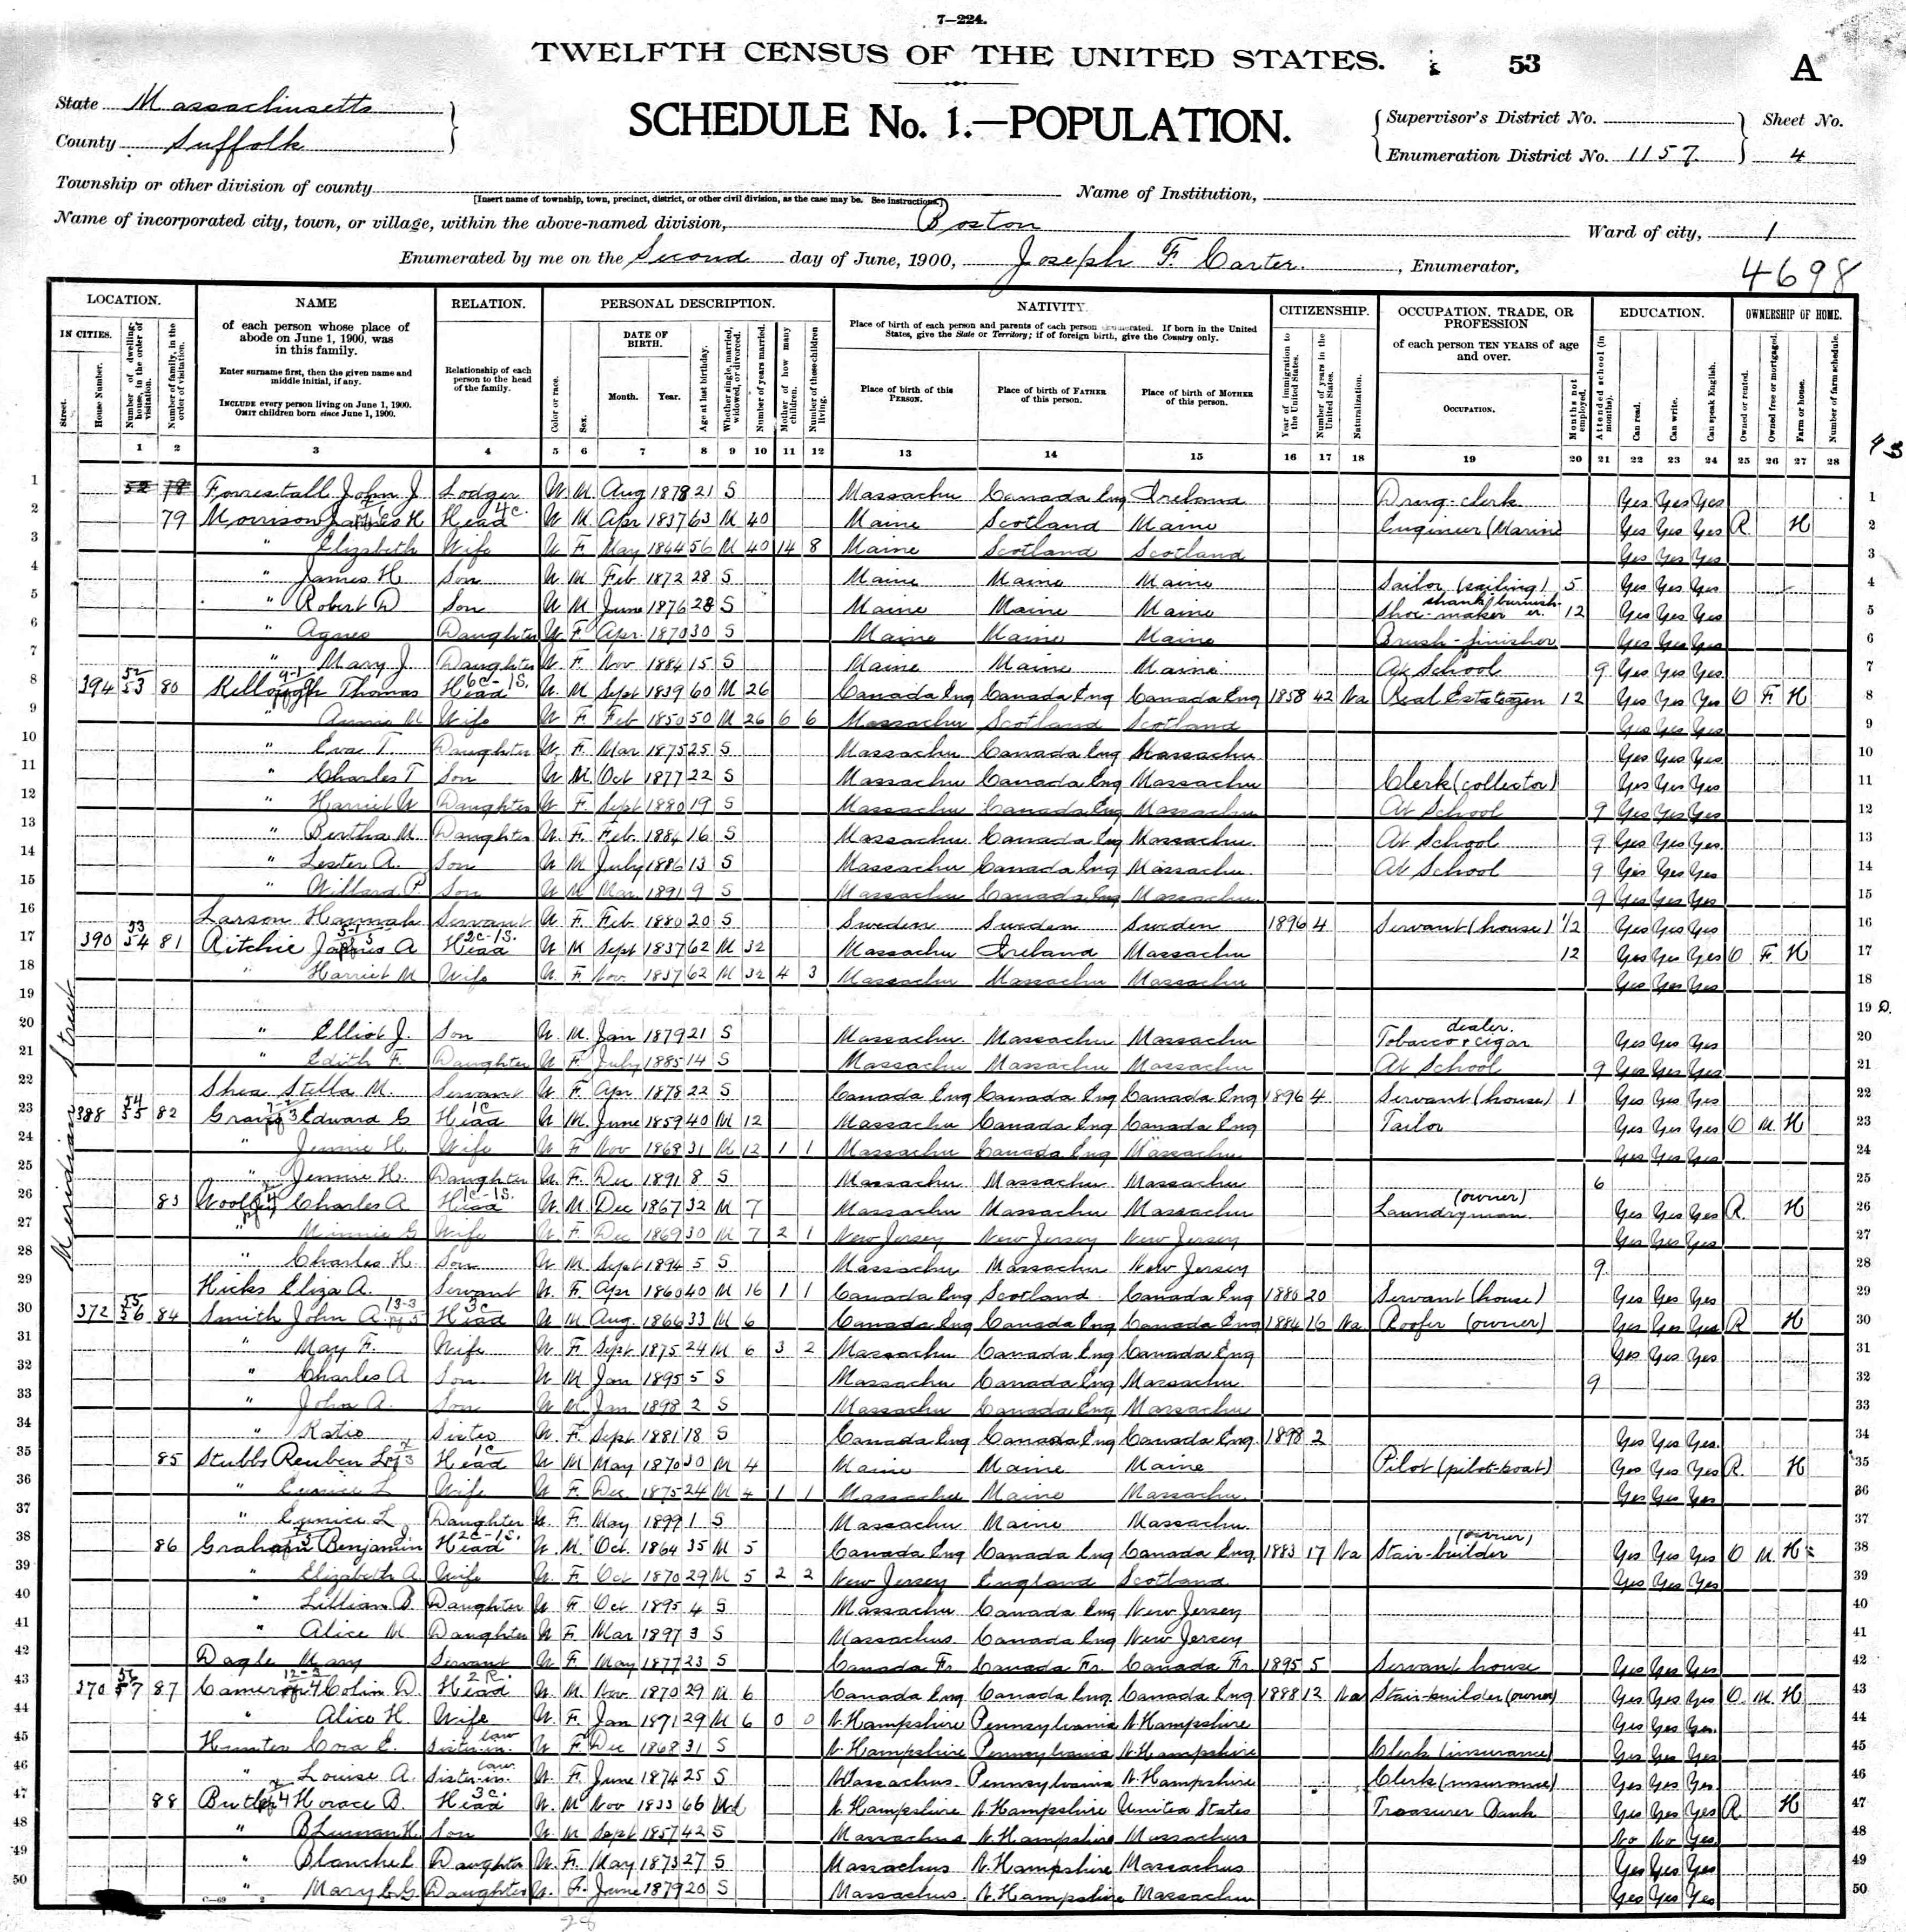 Image of a 1900 census page